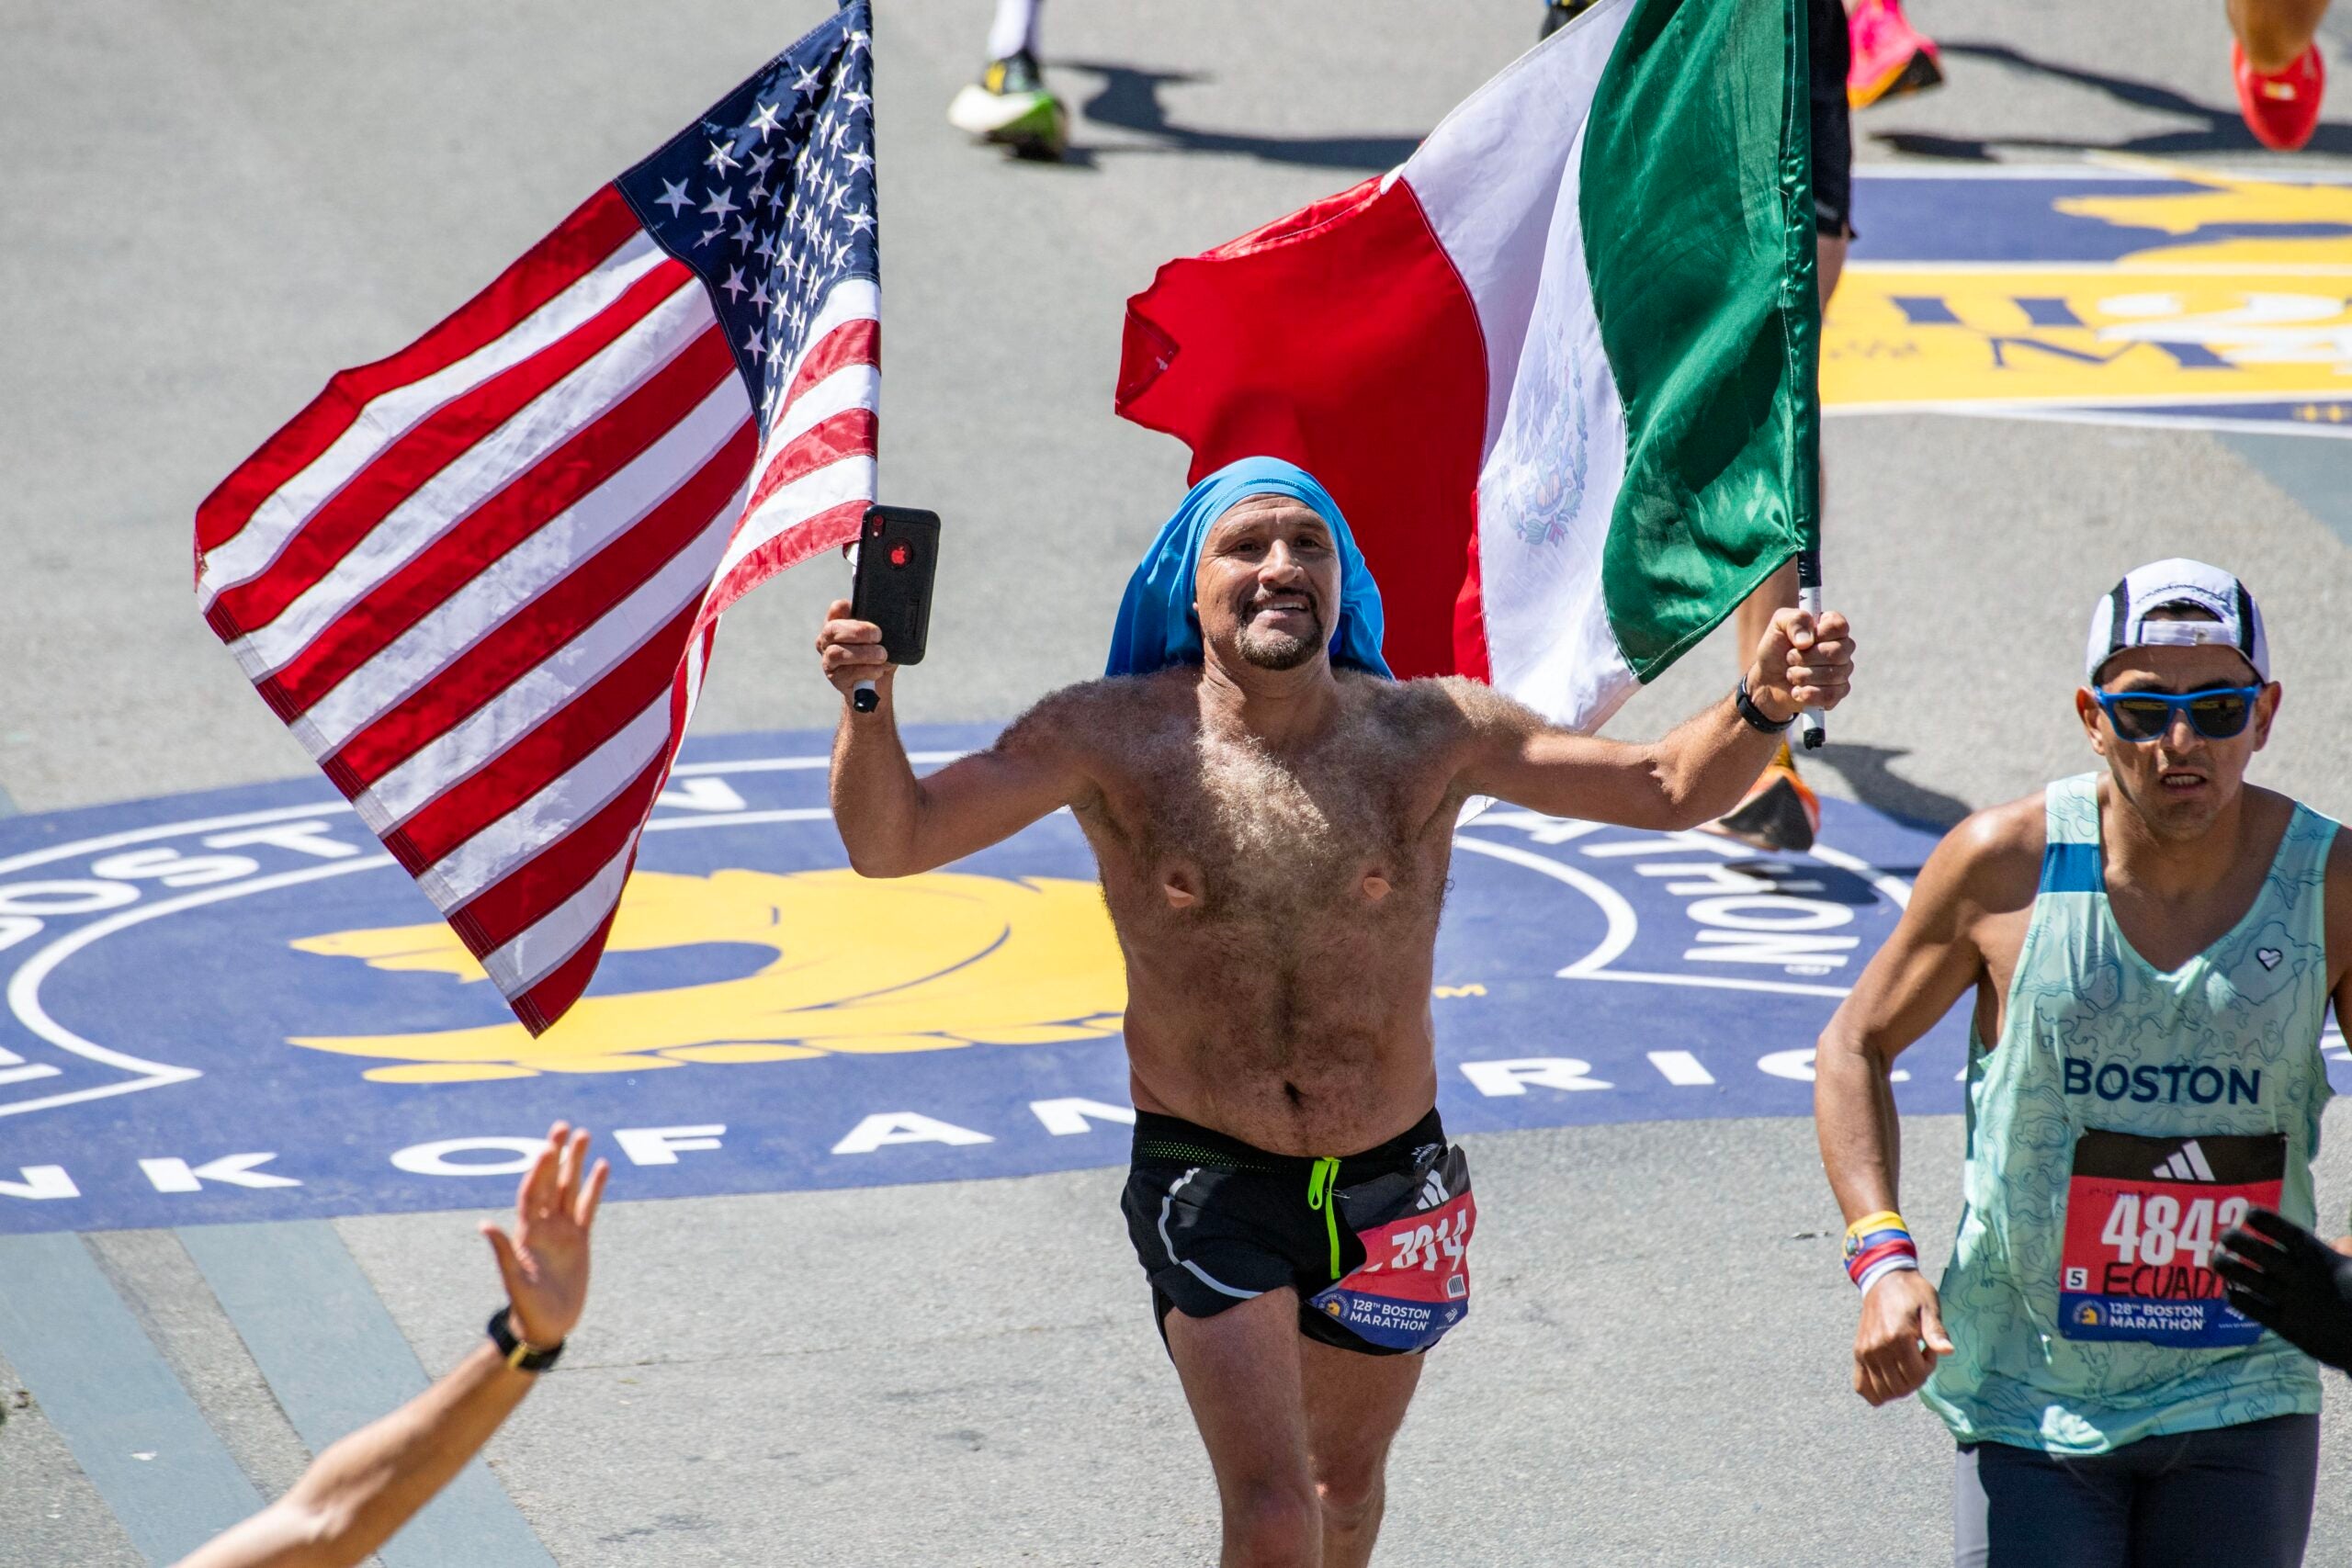 A runner carries an American flag and Mexican flag as he runs toward the finish line during the 128th Boston Marathon on April 15, 2024, in Boston, Massachusetts. The marathon includes around 30,000 athletes from 129 countries running the 26.2 miles from Hopkinton to Boston.